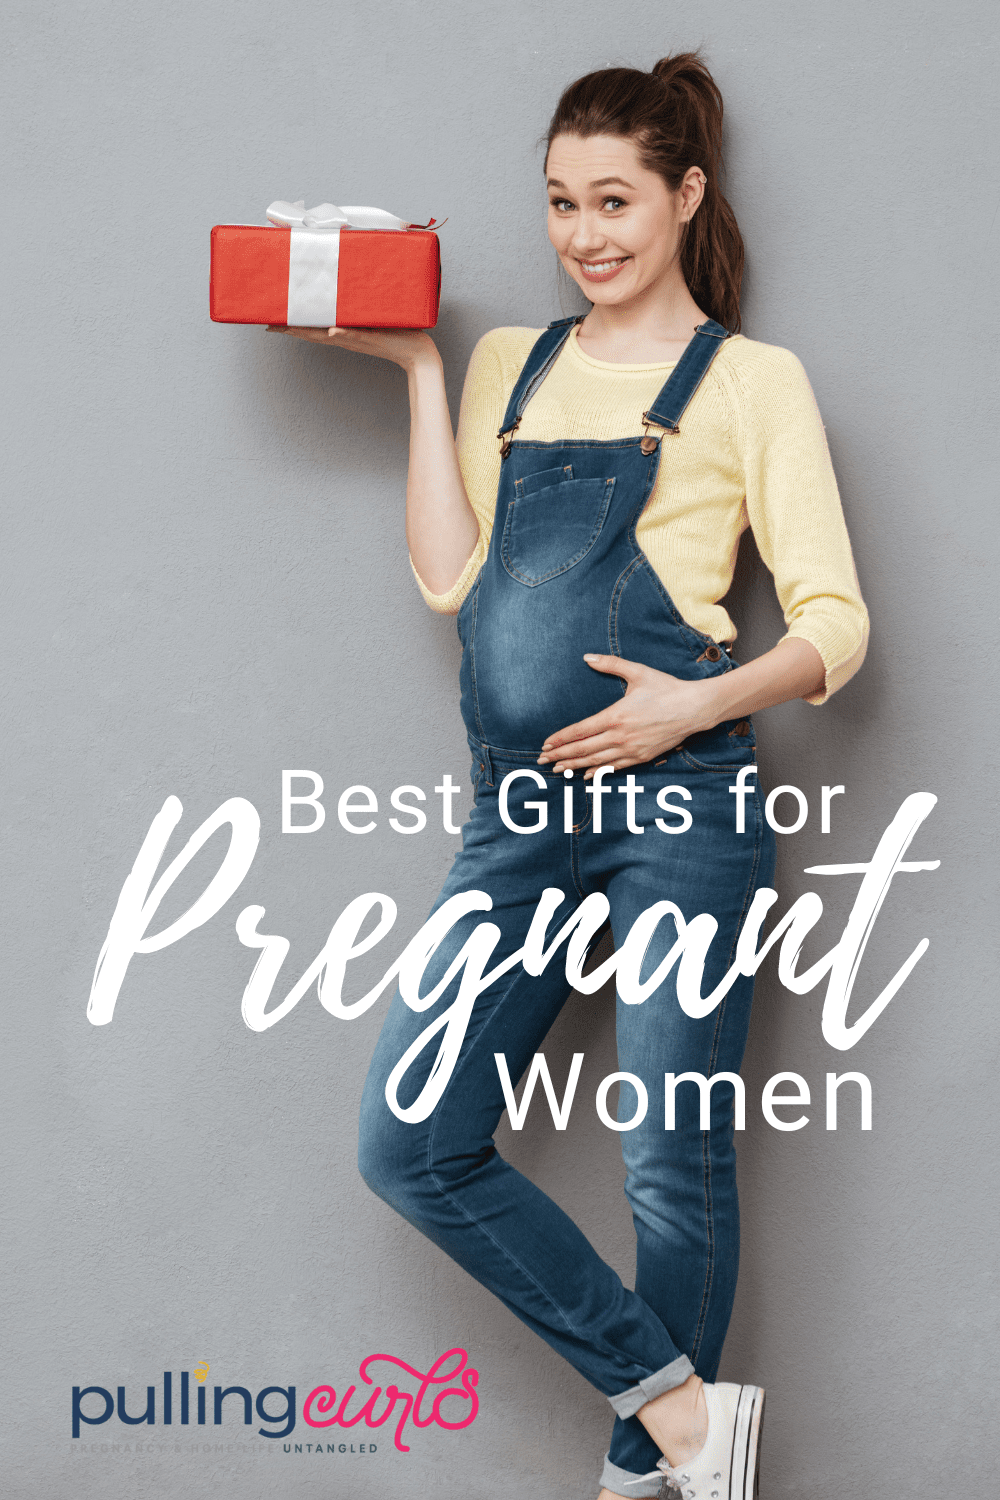 gifts for the pregnant women in your life via @pullingcurls